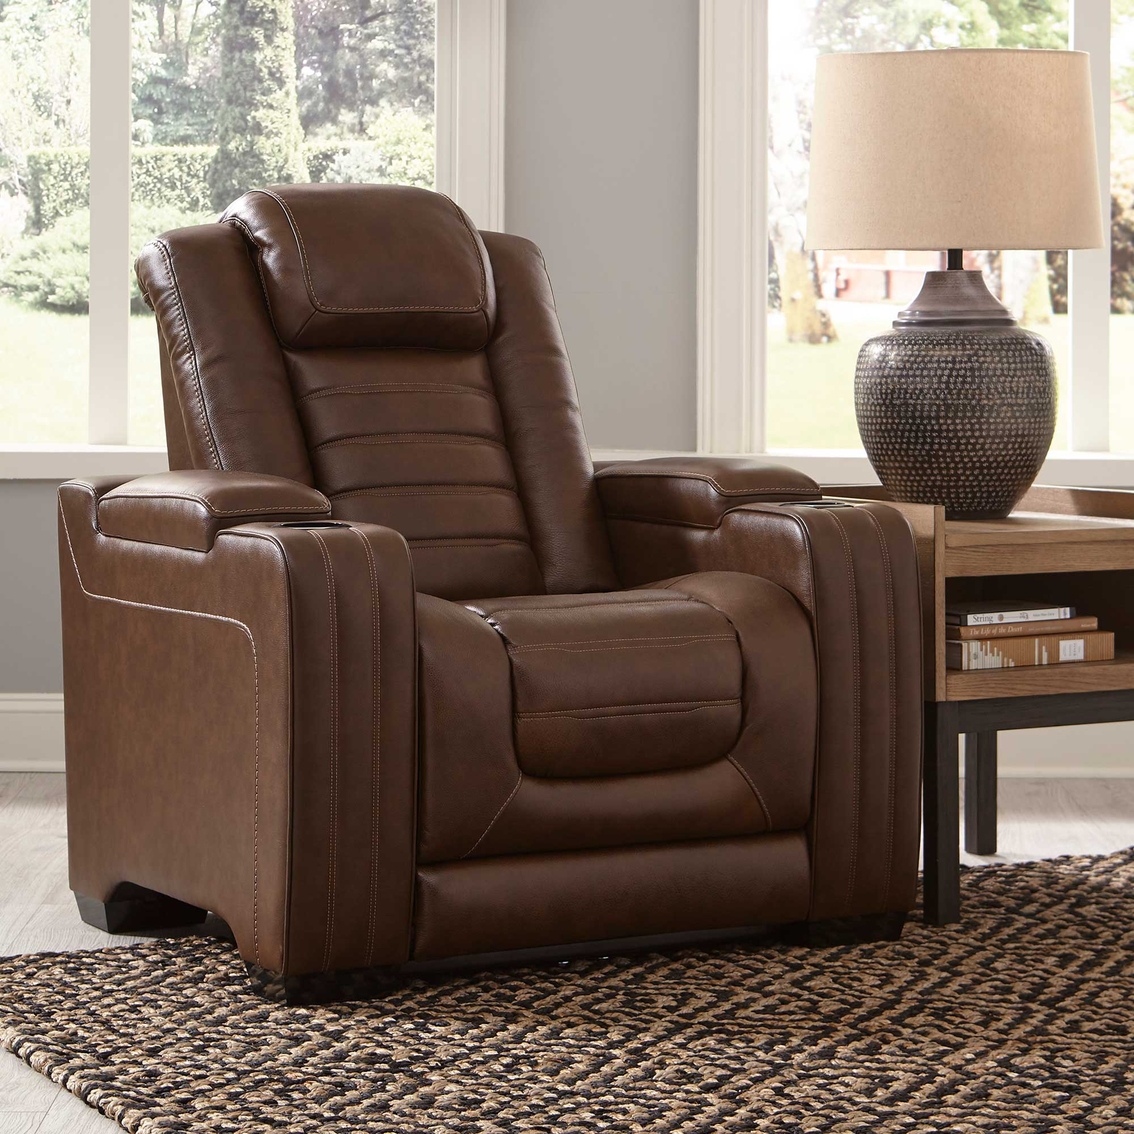 Signature Design by Ashley Backtrack Power Recliner with Adjustable Headrest - Image 5 of 9